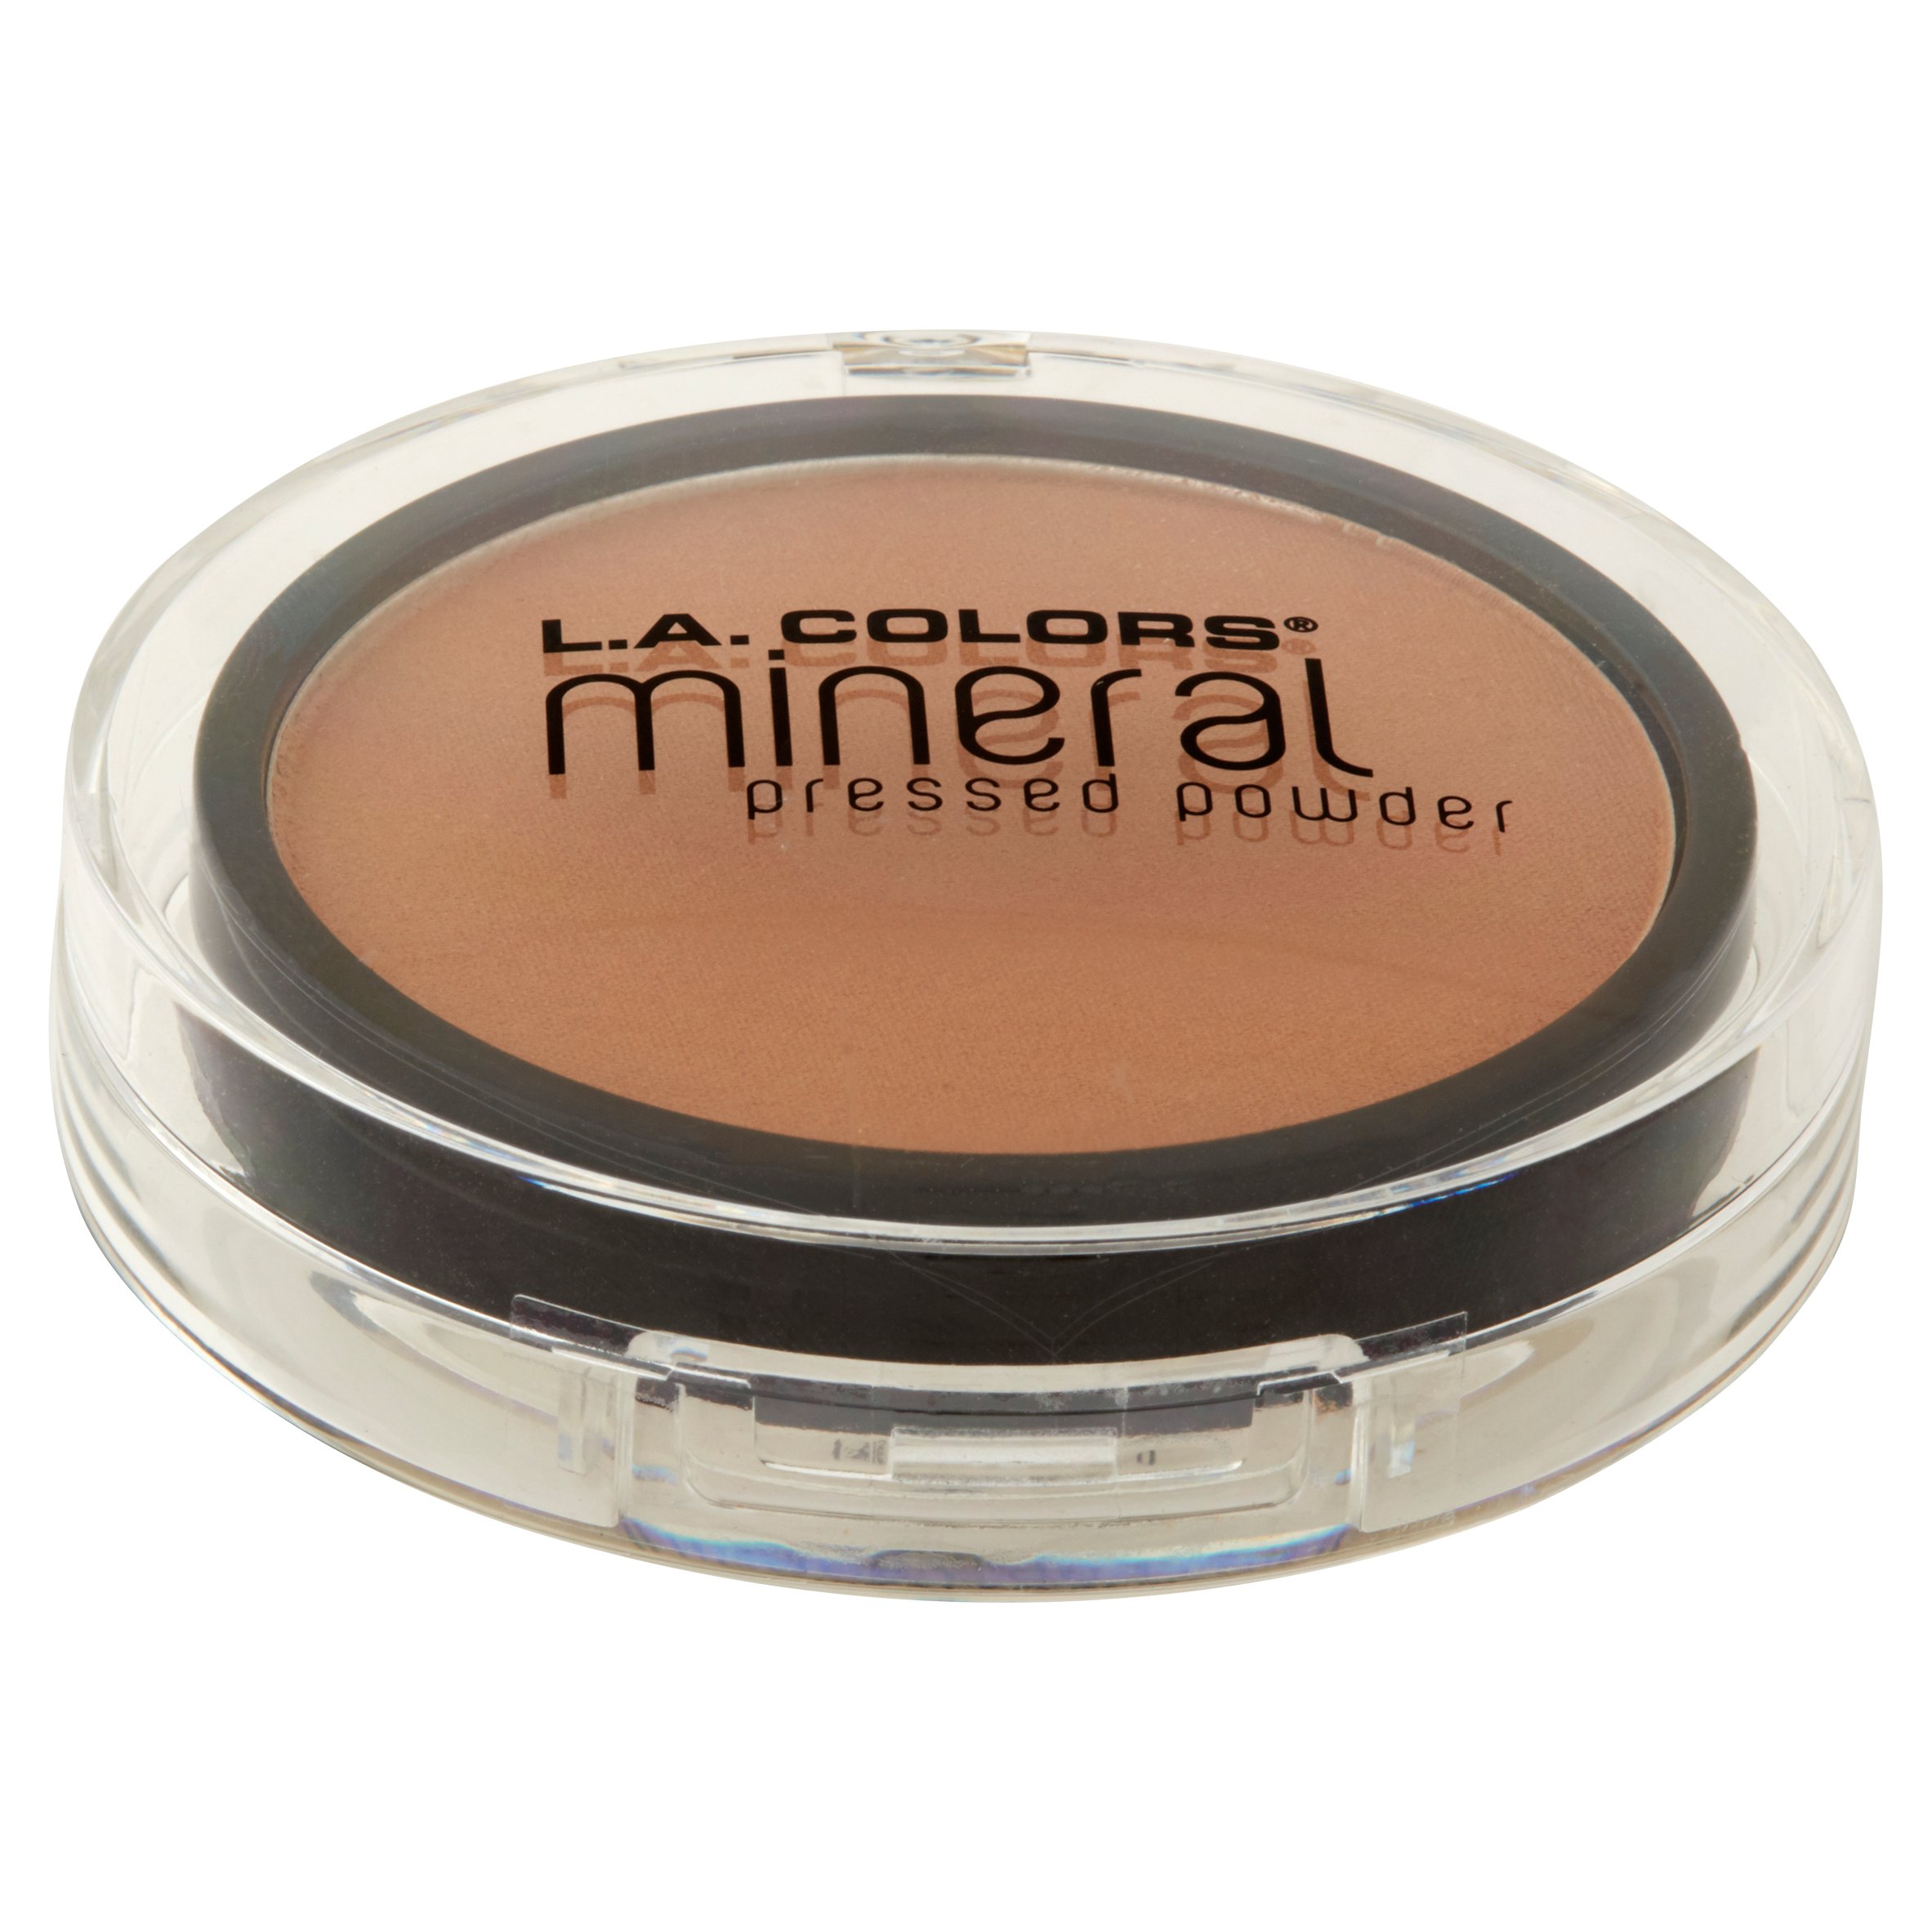 L.A. Colors Mineral Pressed Powder, Sand - image 2 of 4